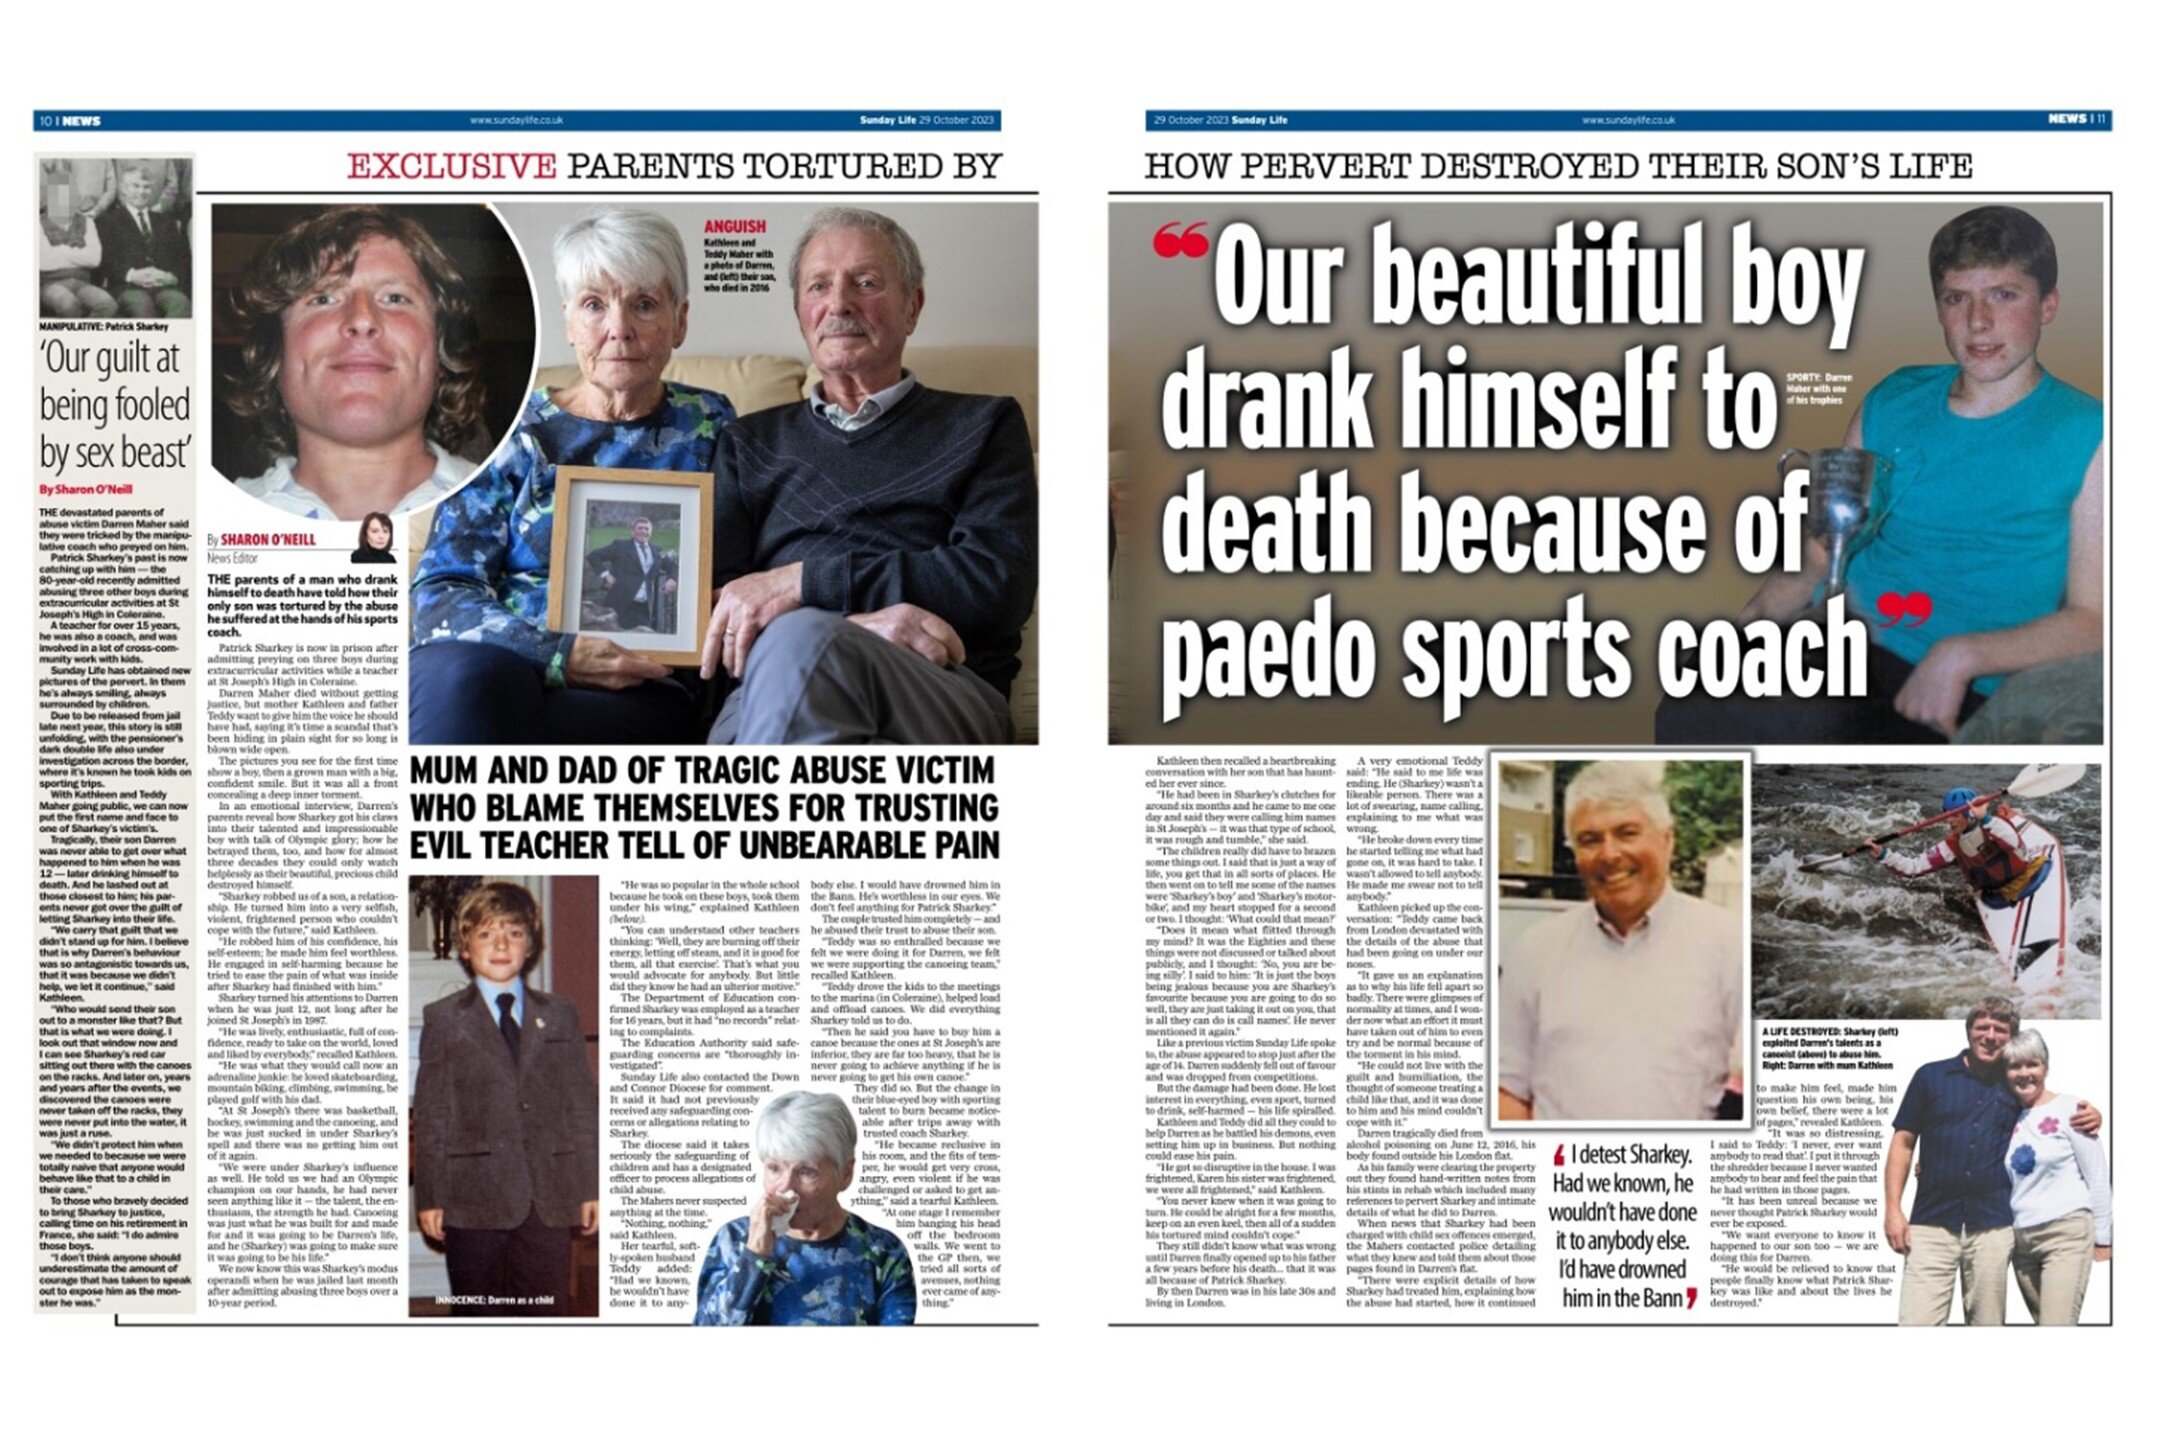 October 2023

&lsquo;Our beautiful boy drank himself to death because of paedophile NI teacher&rsquo;

The parents of a man who drank himself to death have told how their only son was tortured by the abuse he suffered at the hands of his sports coach